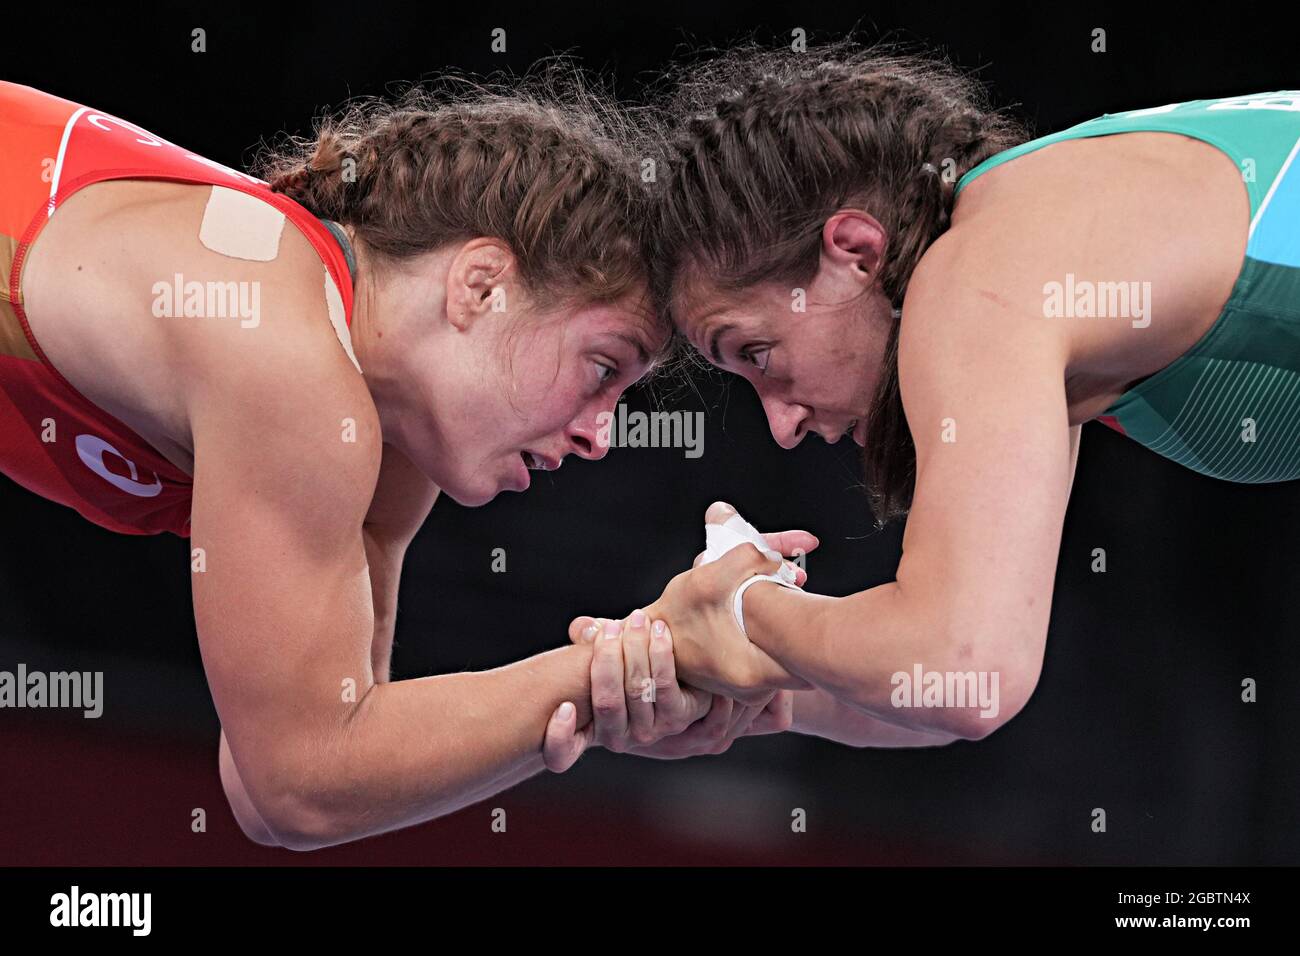 Chiba, Japan. 5th Aug, 2021. Valeria Koblova (L) of ROC combats with Evelina Georgieva Nikolova of Bulgaria during the wrestling women's freestyle 57kg bronze medal match at the Tokyo 2020 Olympic Games in Chiba, Japan, Aug. 5, 2021. Credit: Wang Yuguo/Xinhua/Alamy Live News Stock Photo